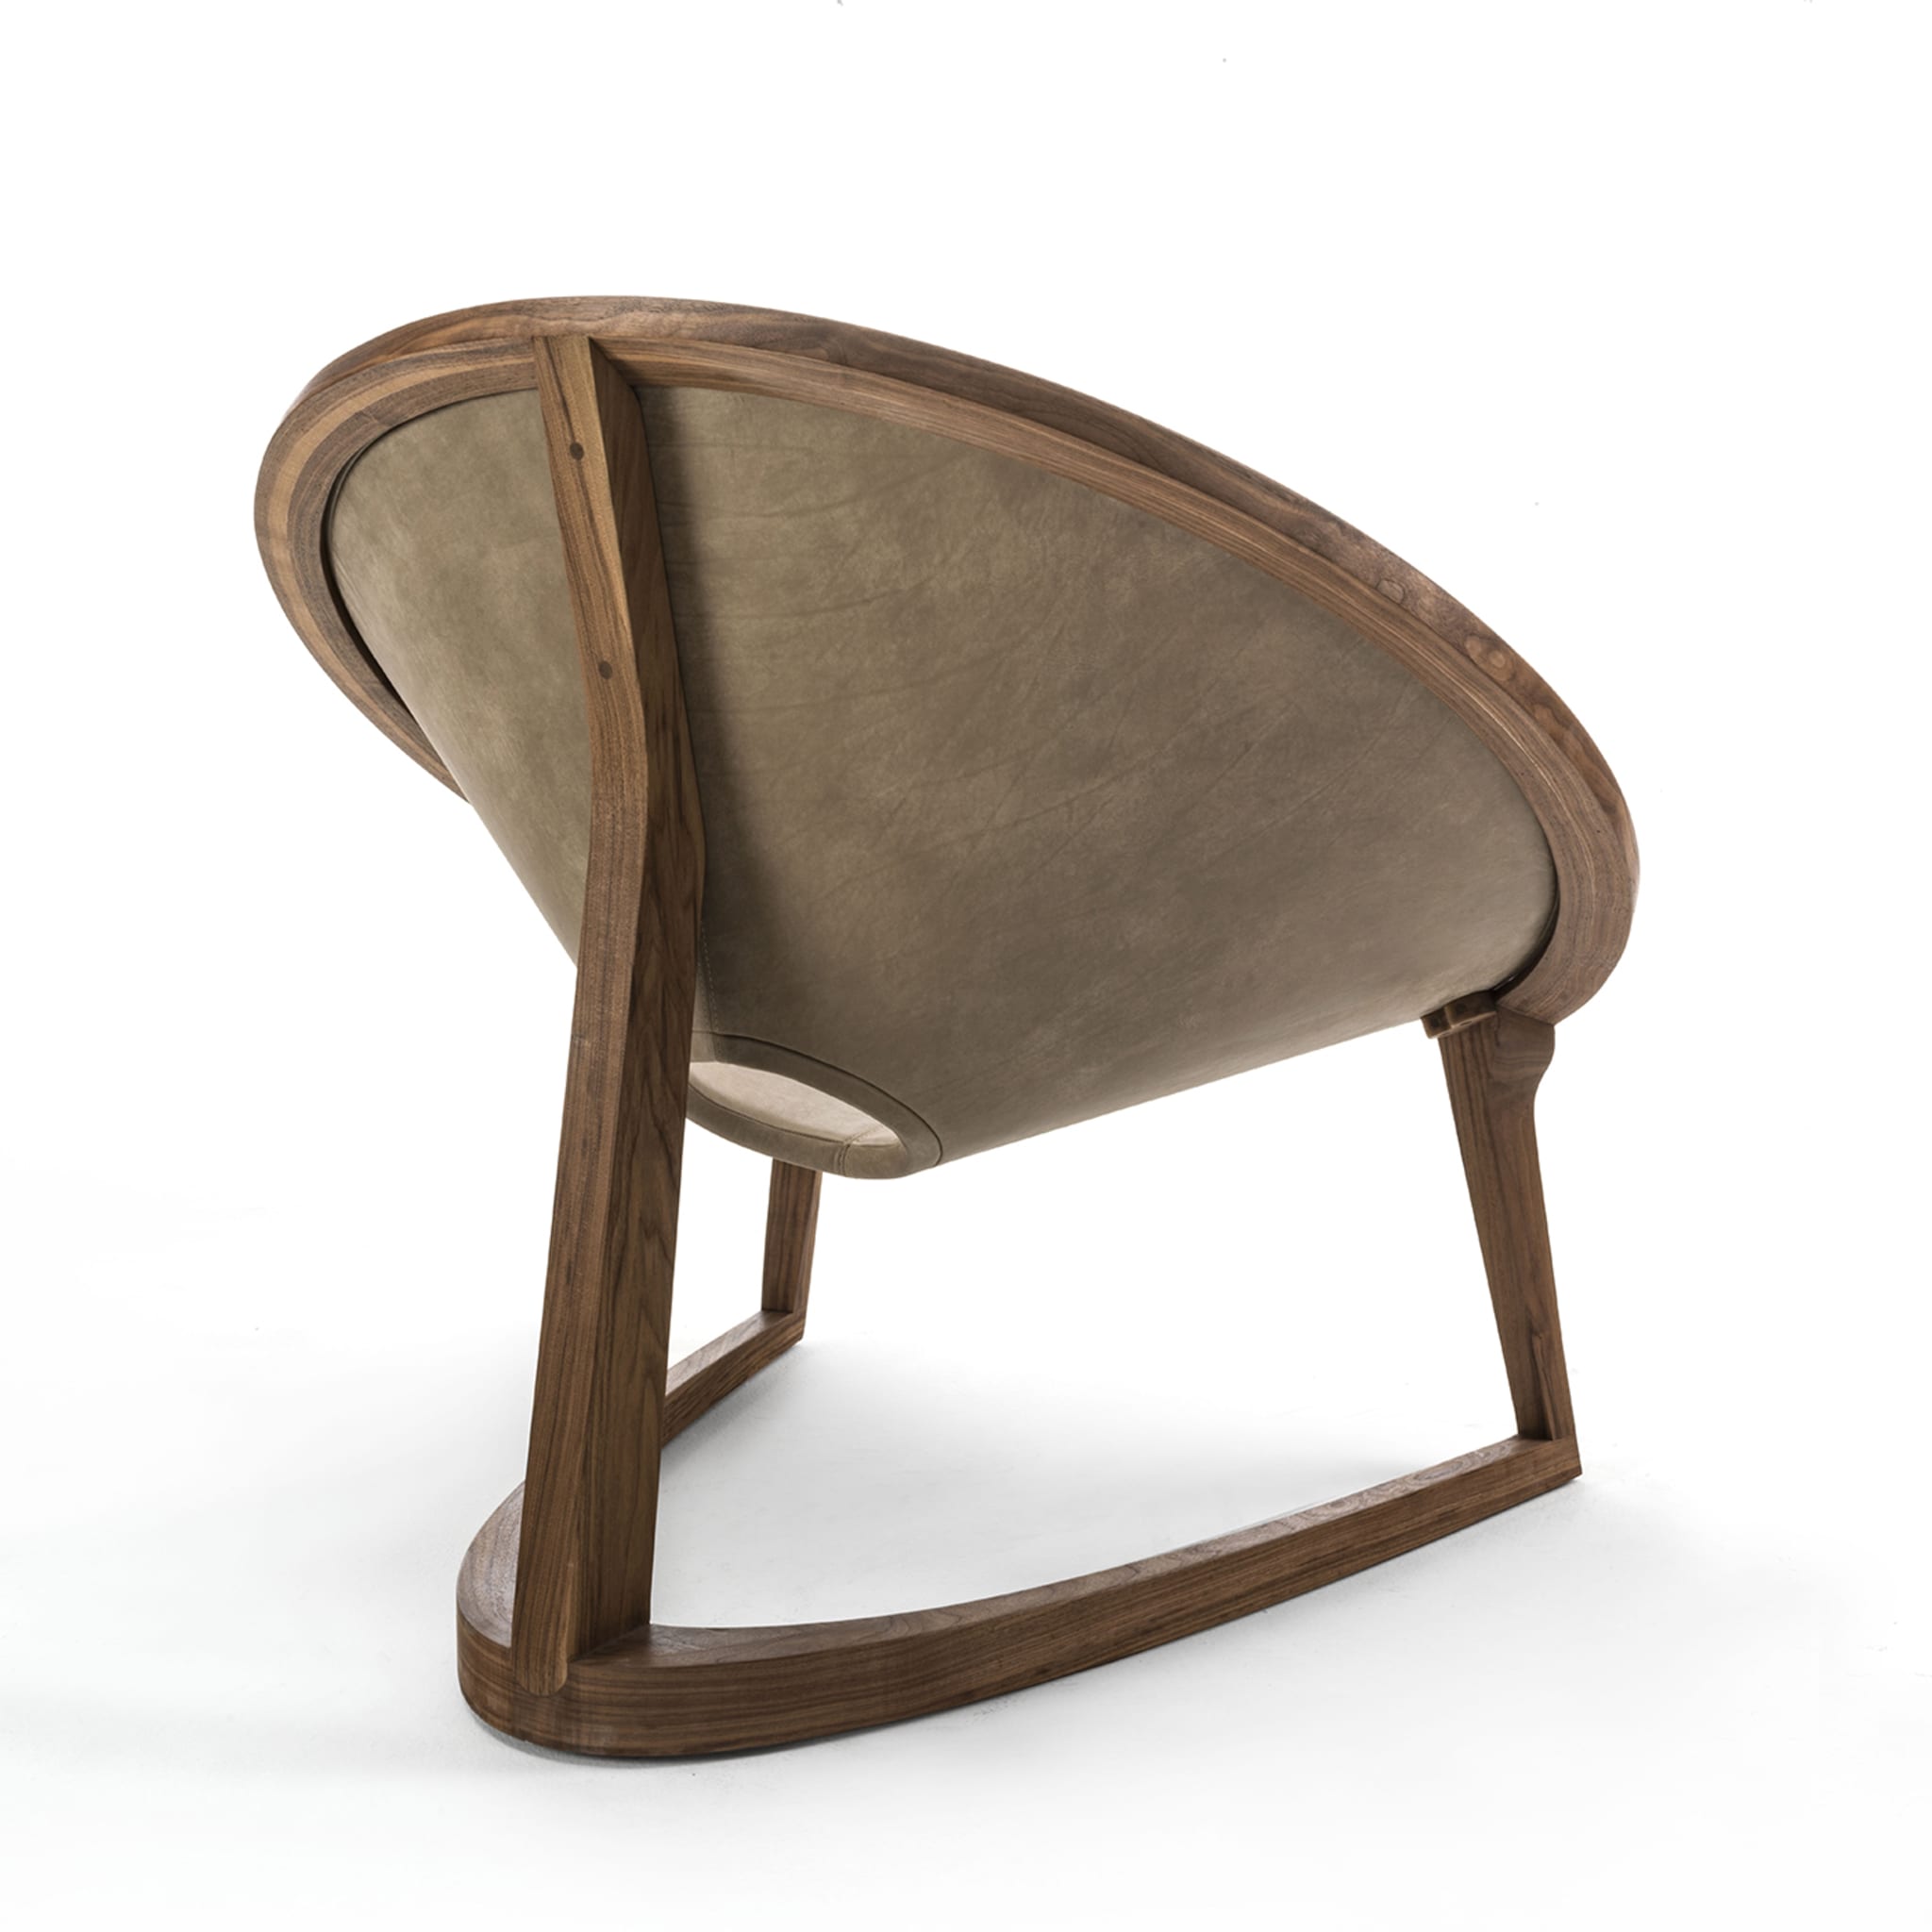 Ying & Yang Lounge Chair by Steve Leung - Alternative view 5